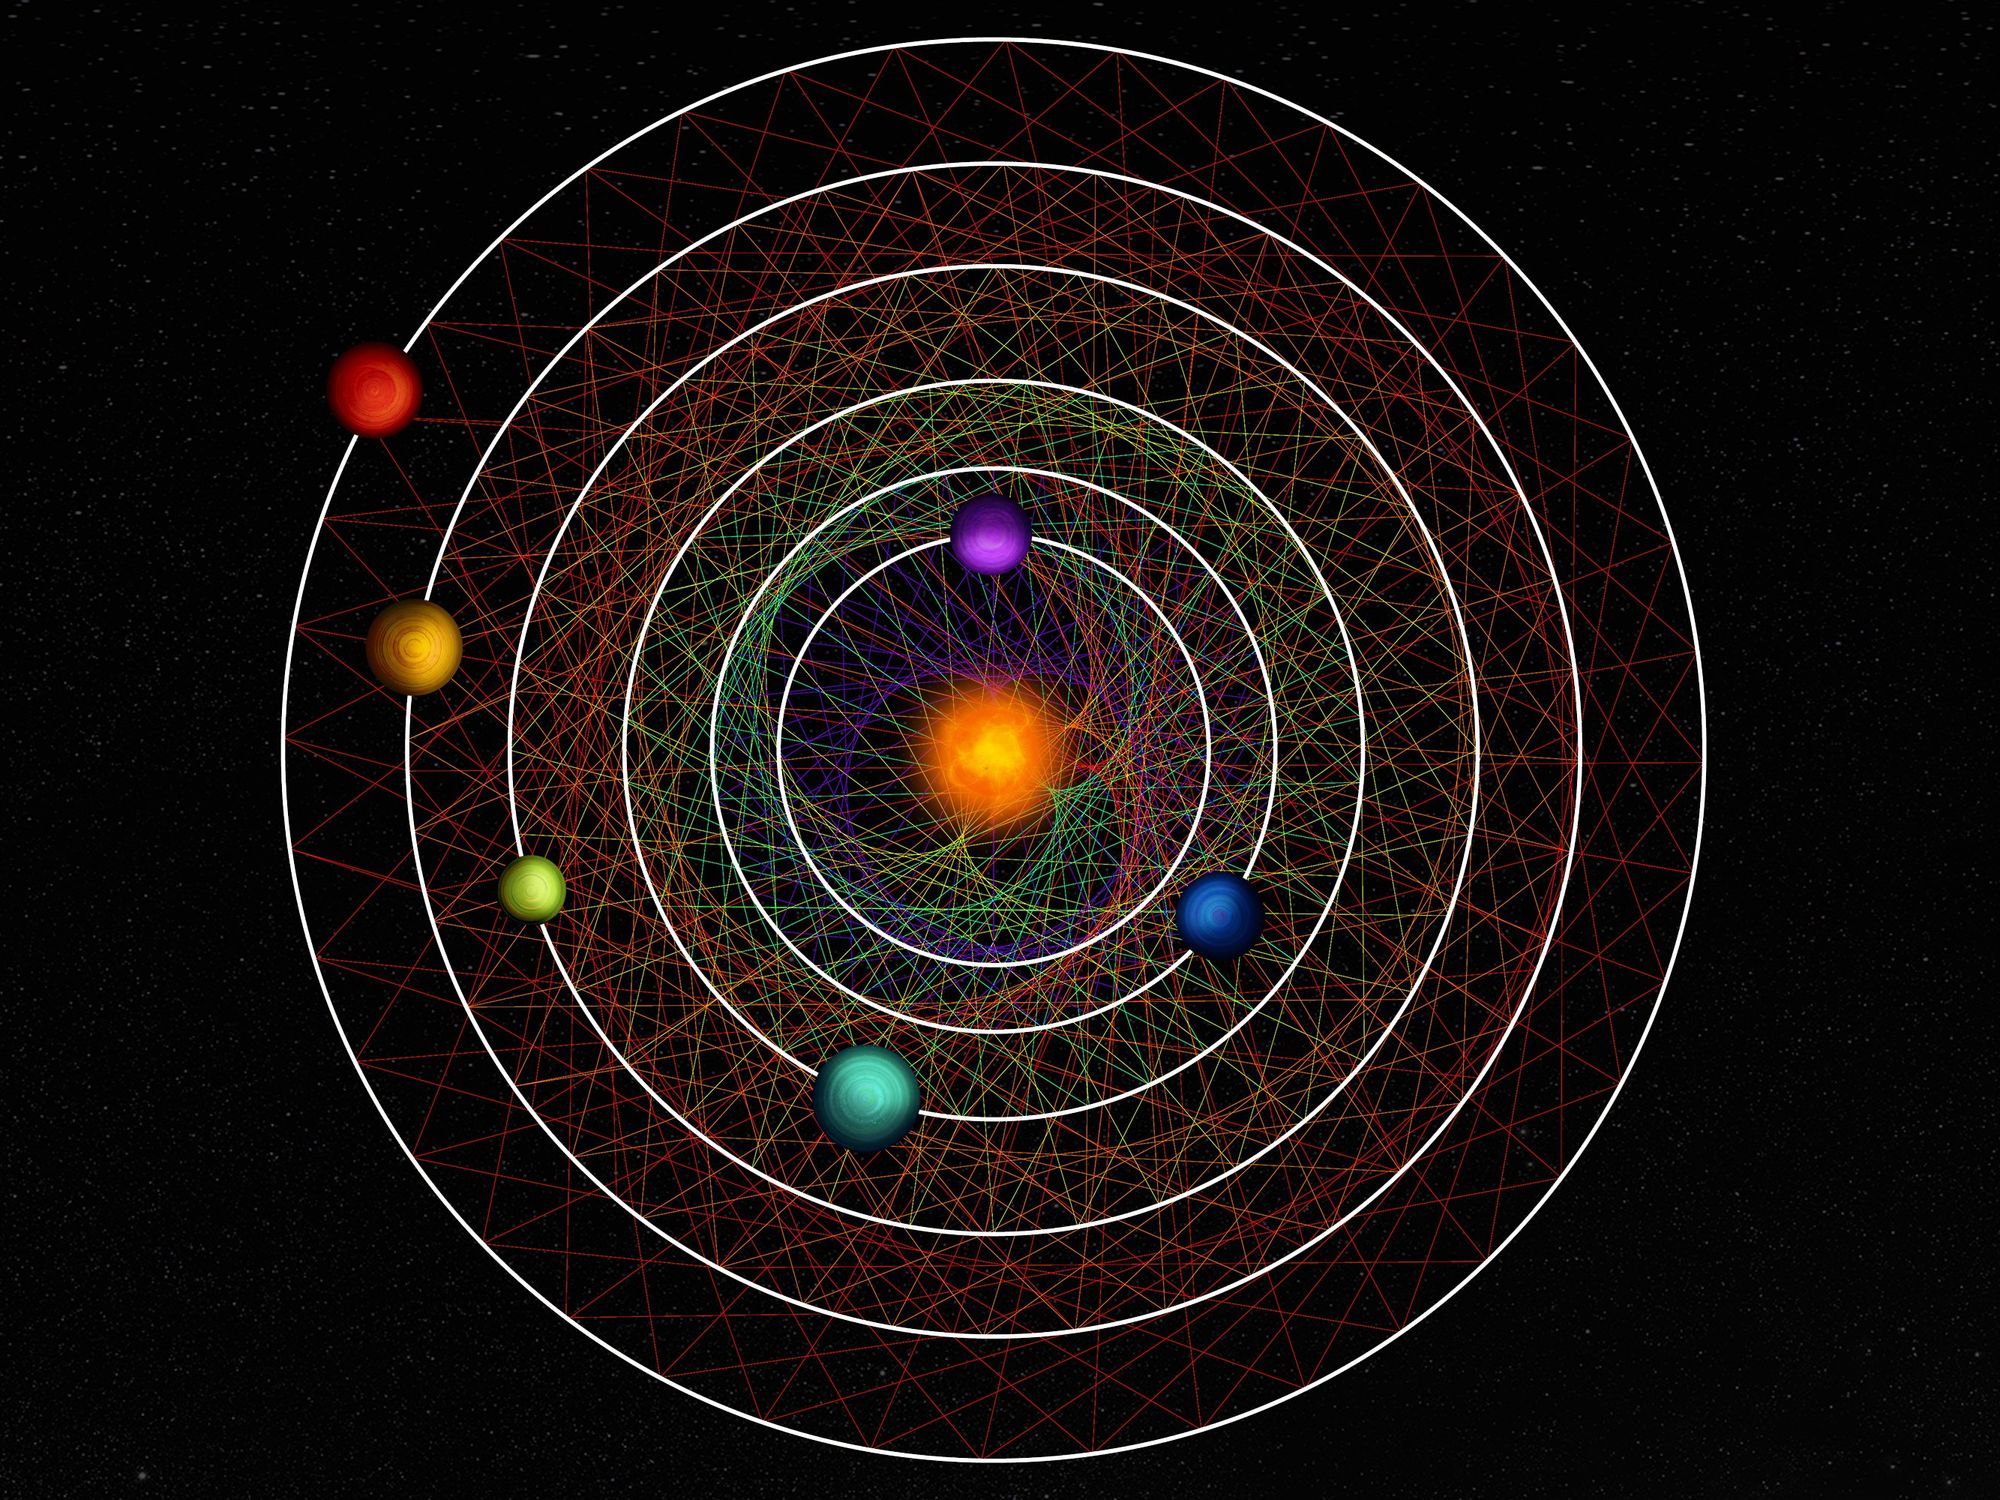 illustration of the orbit of the planets